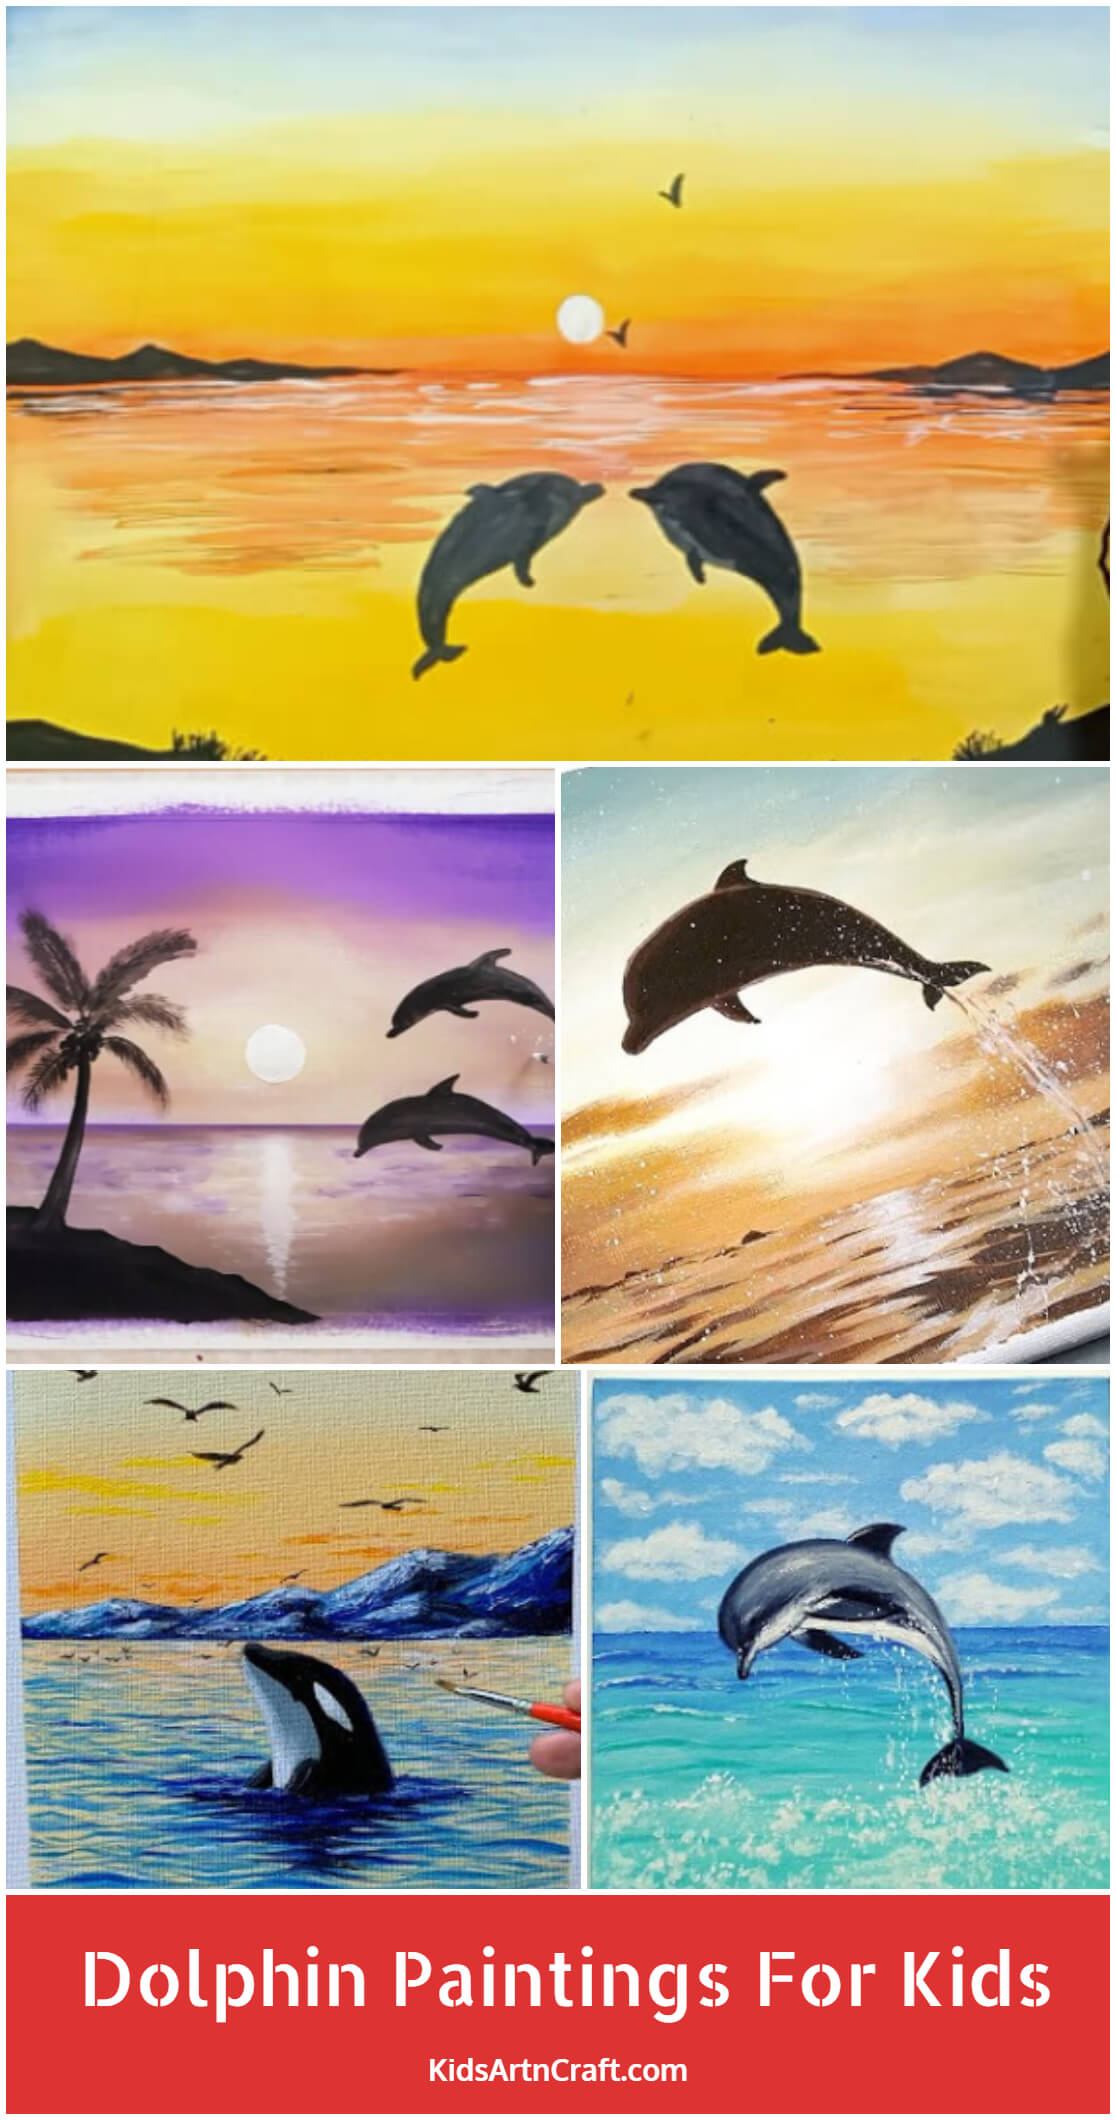 Dolphin Paintings For Kids